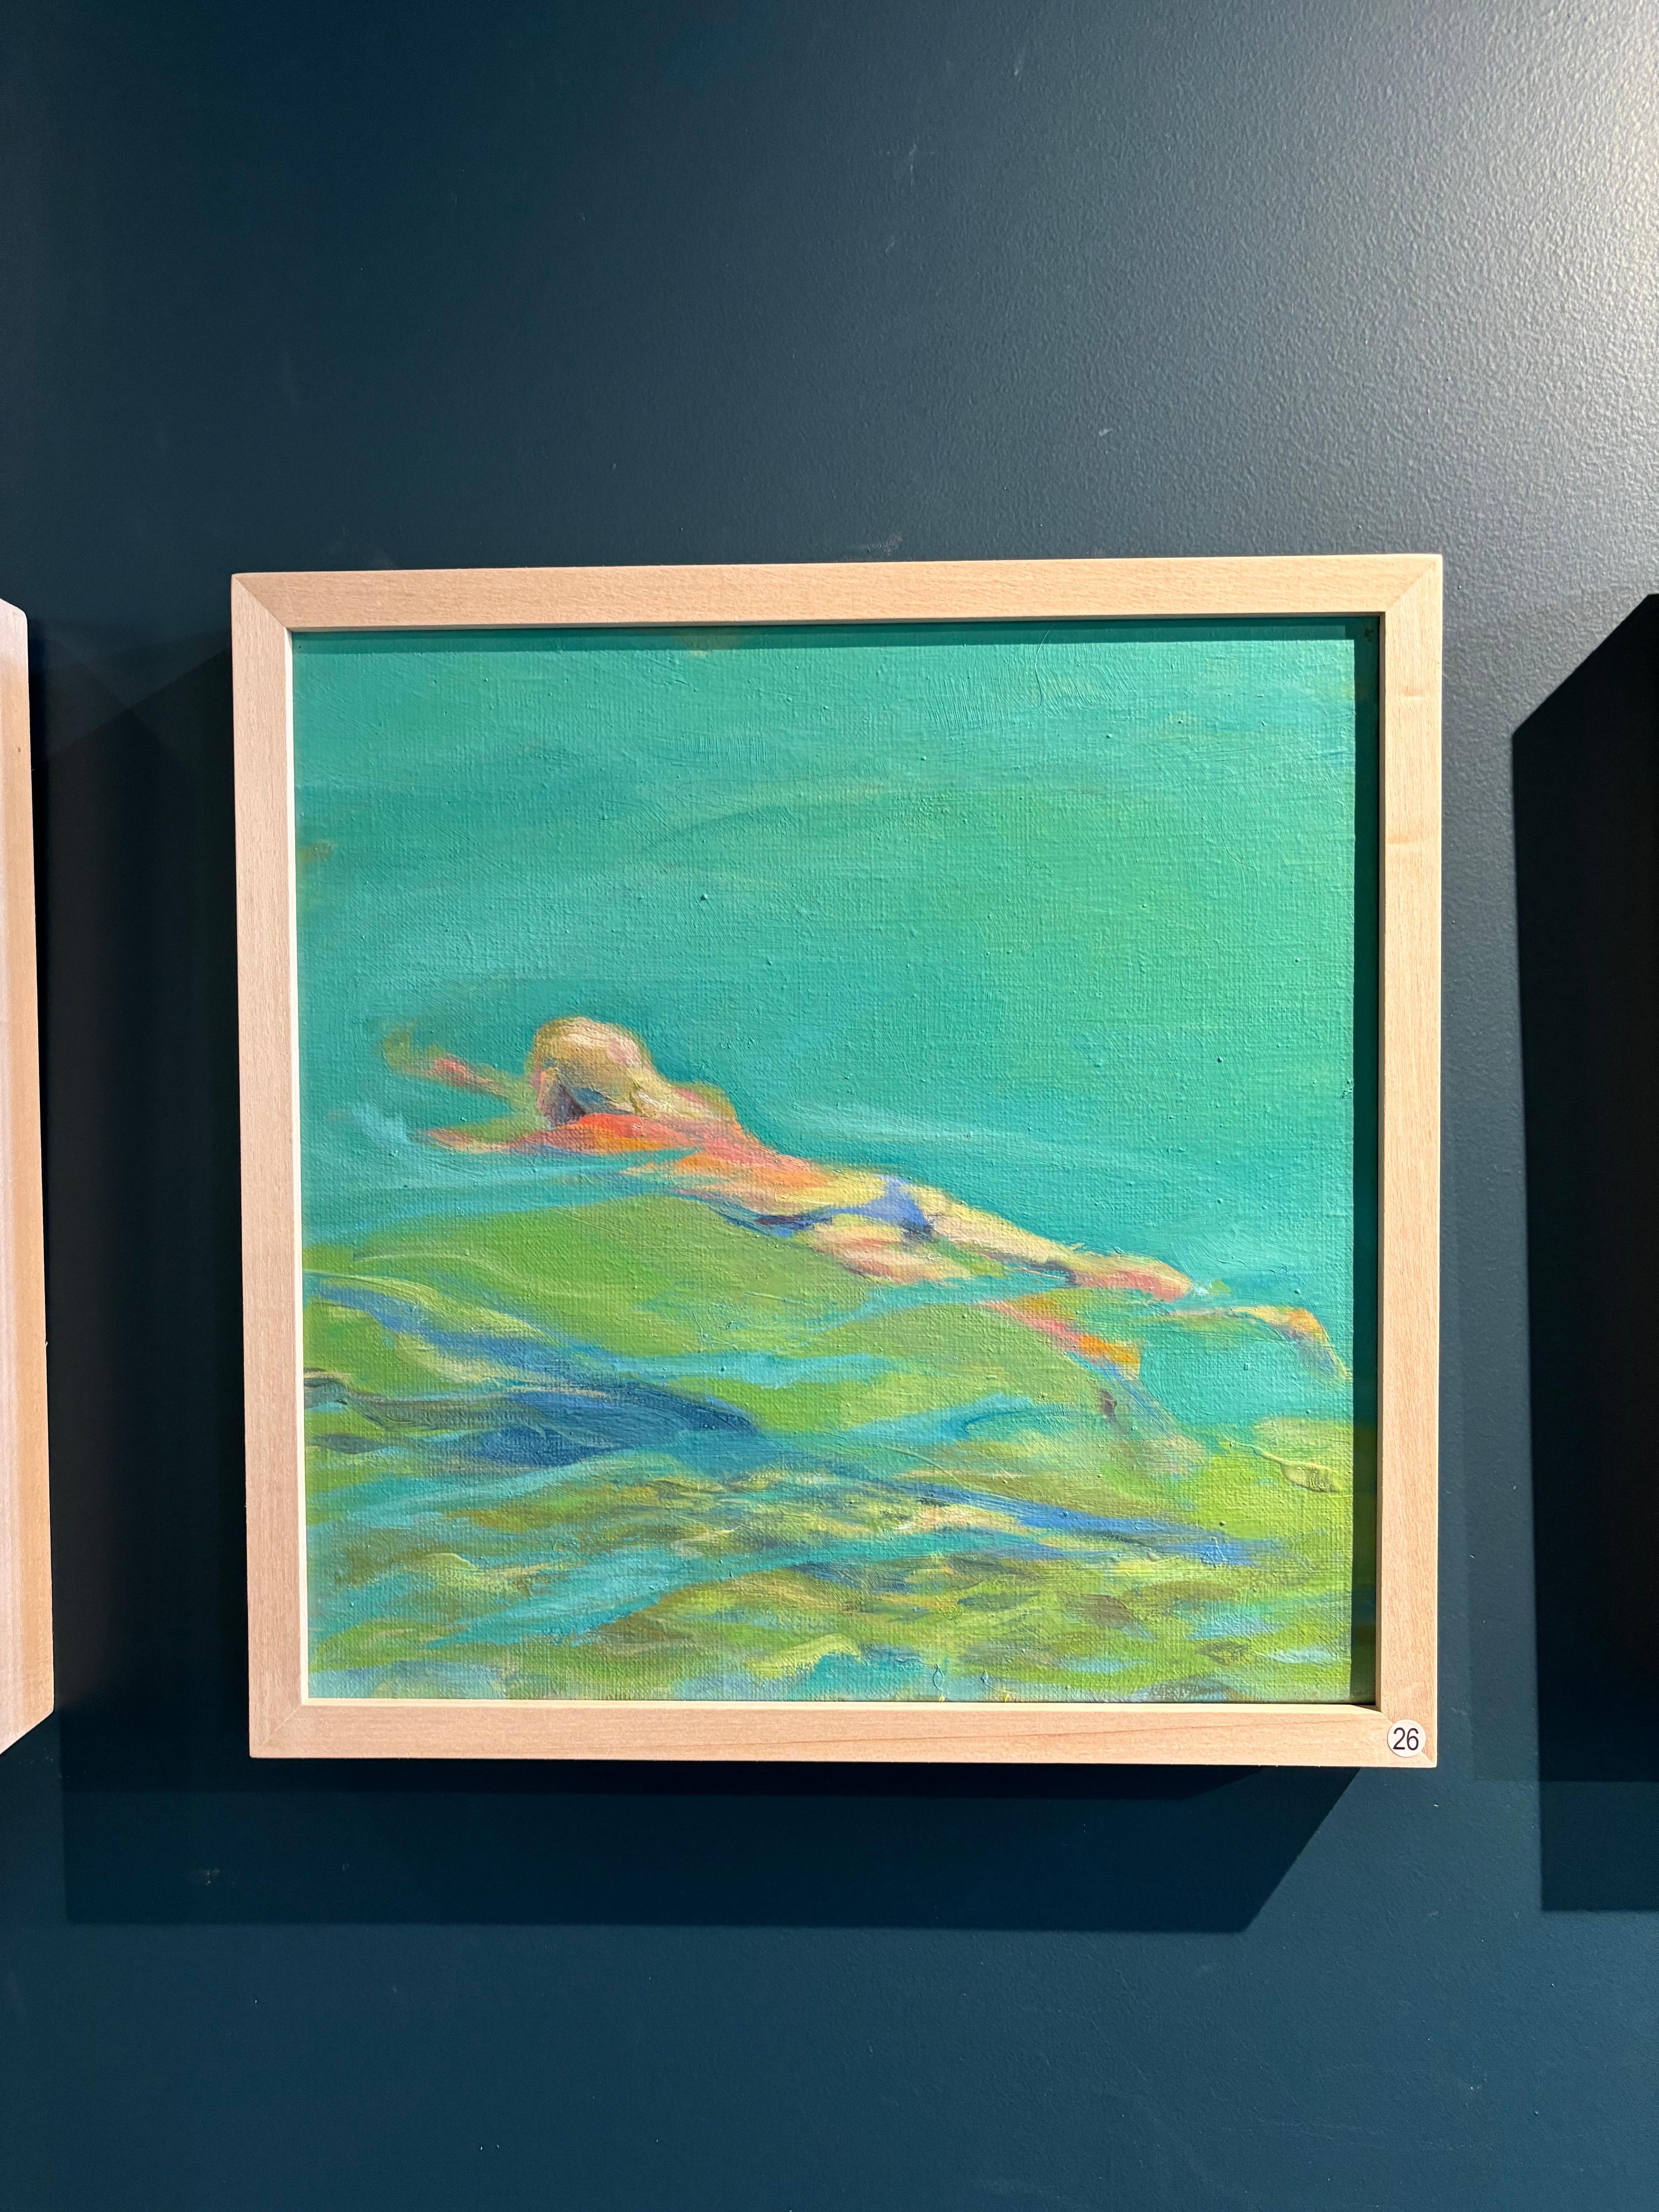 Water,Swimmer, blue


Birgitte LYKKE MADSEN (Odense, Denmark, 1960)

1981-86, Educated from the Academy of Fine Arts, Odense
First solo exhibition in 1983

Artist statement:

“I am a painter. I am fascinated by the difference in cold and warm colors